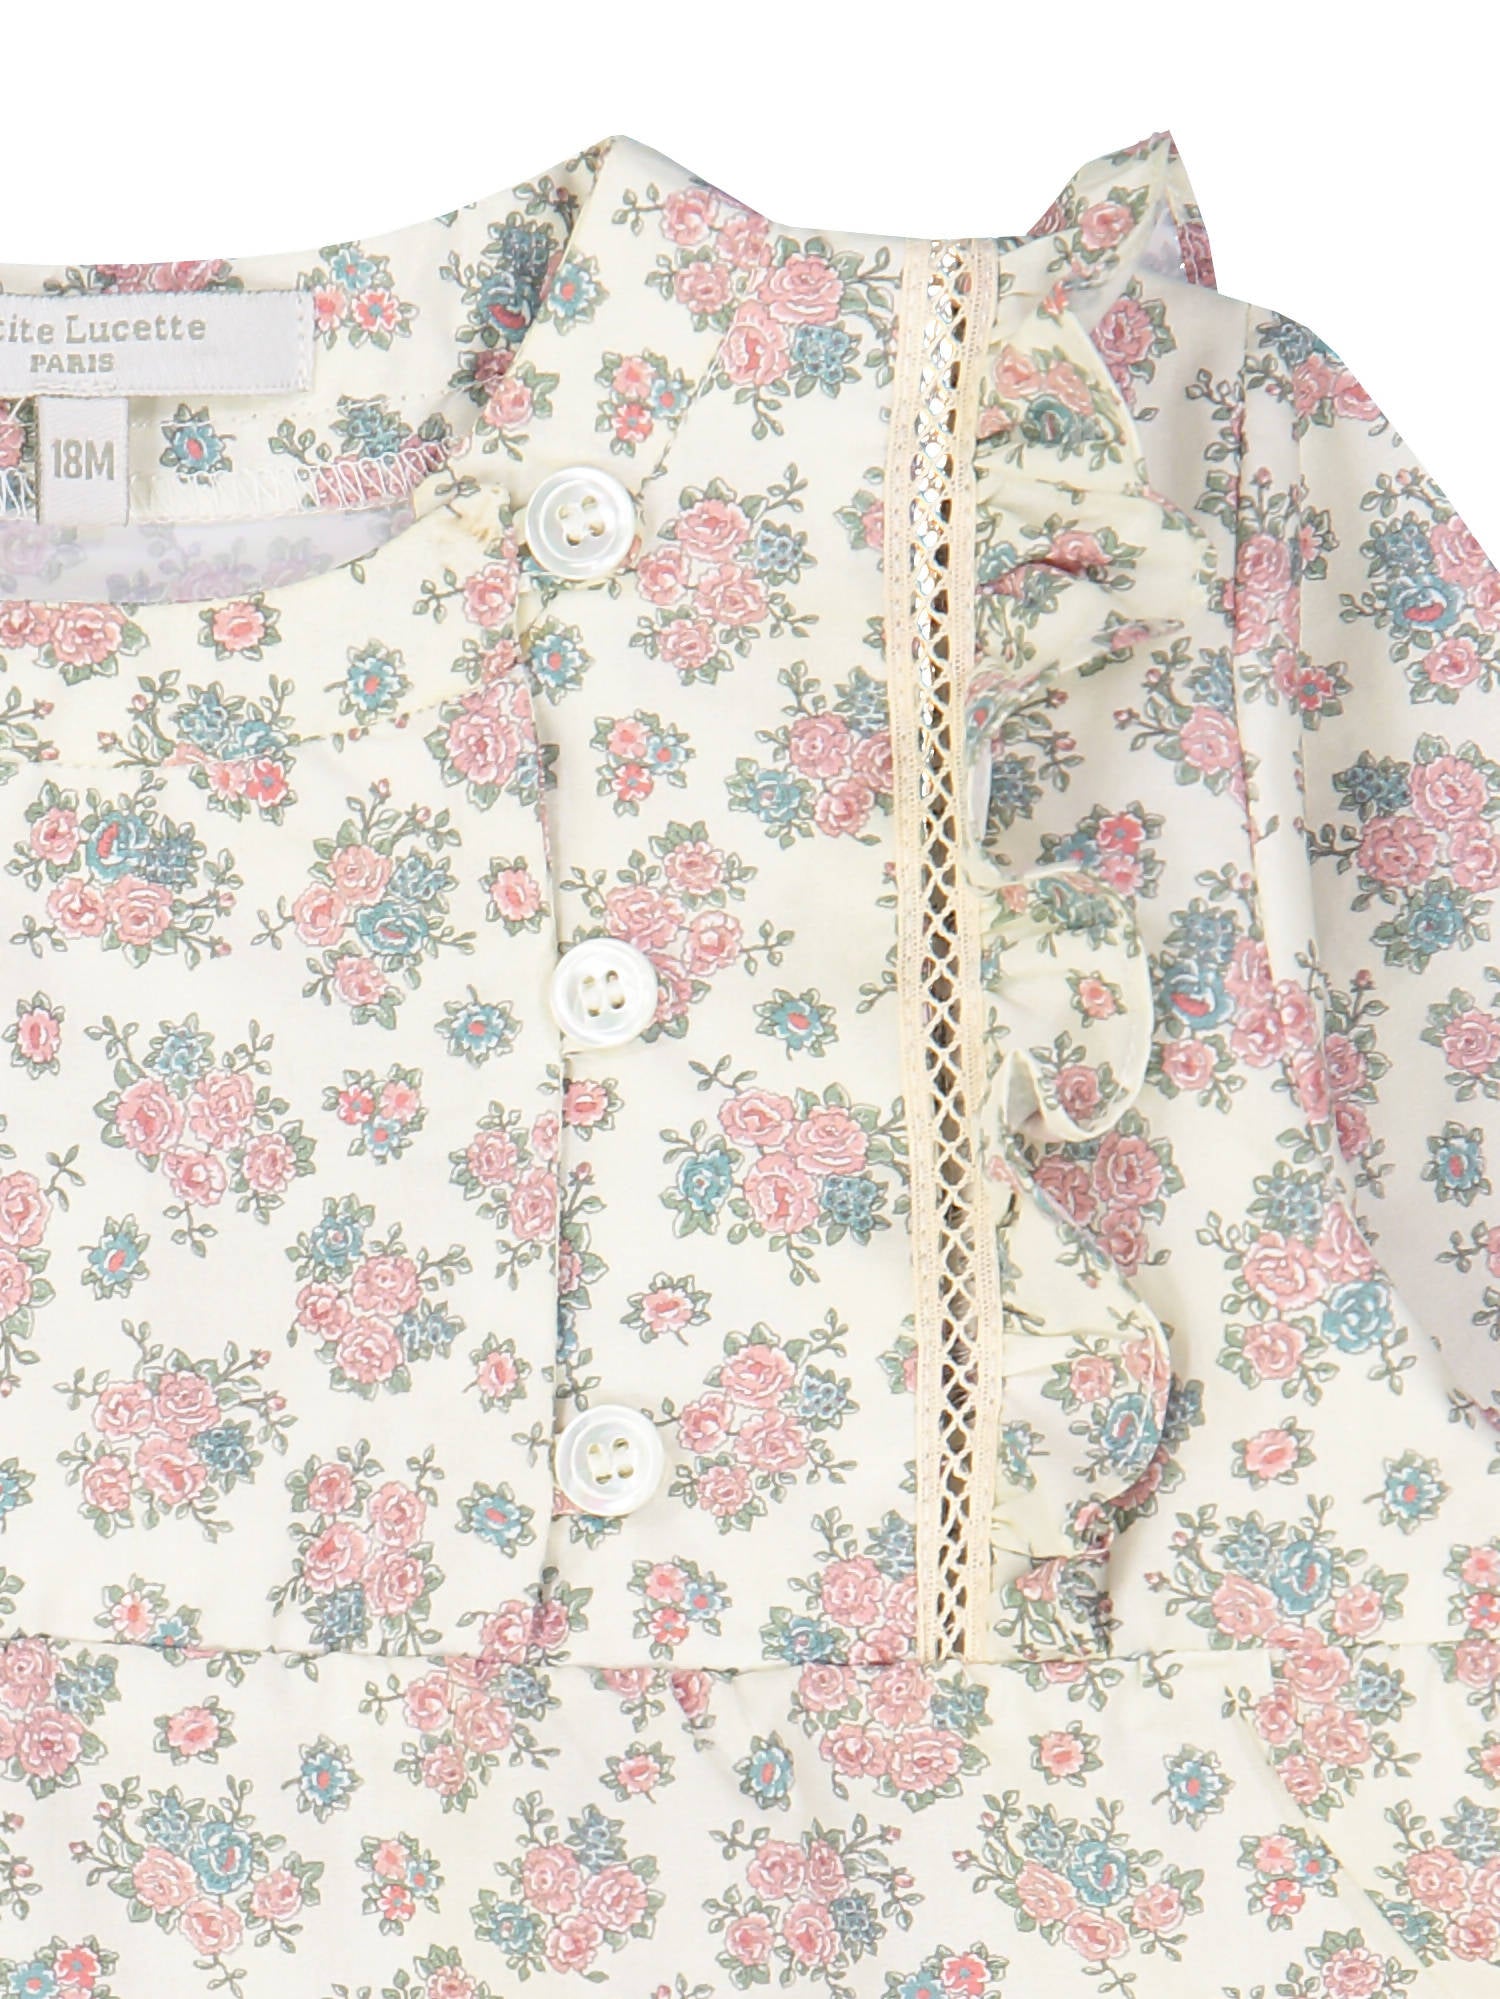 Blouse Garden Print - Petite Lucette - French Wink